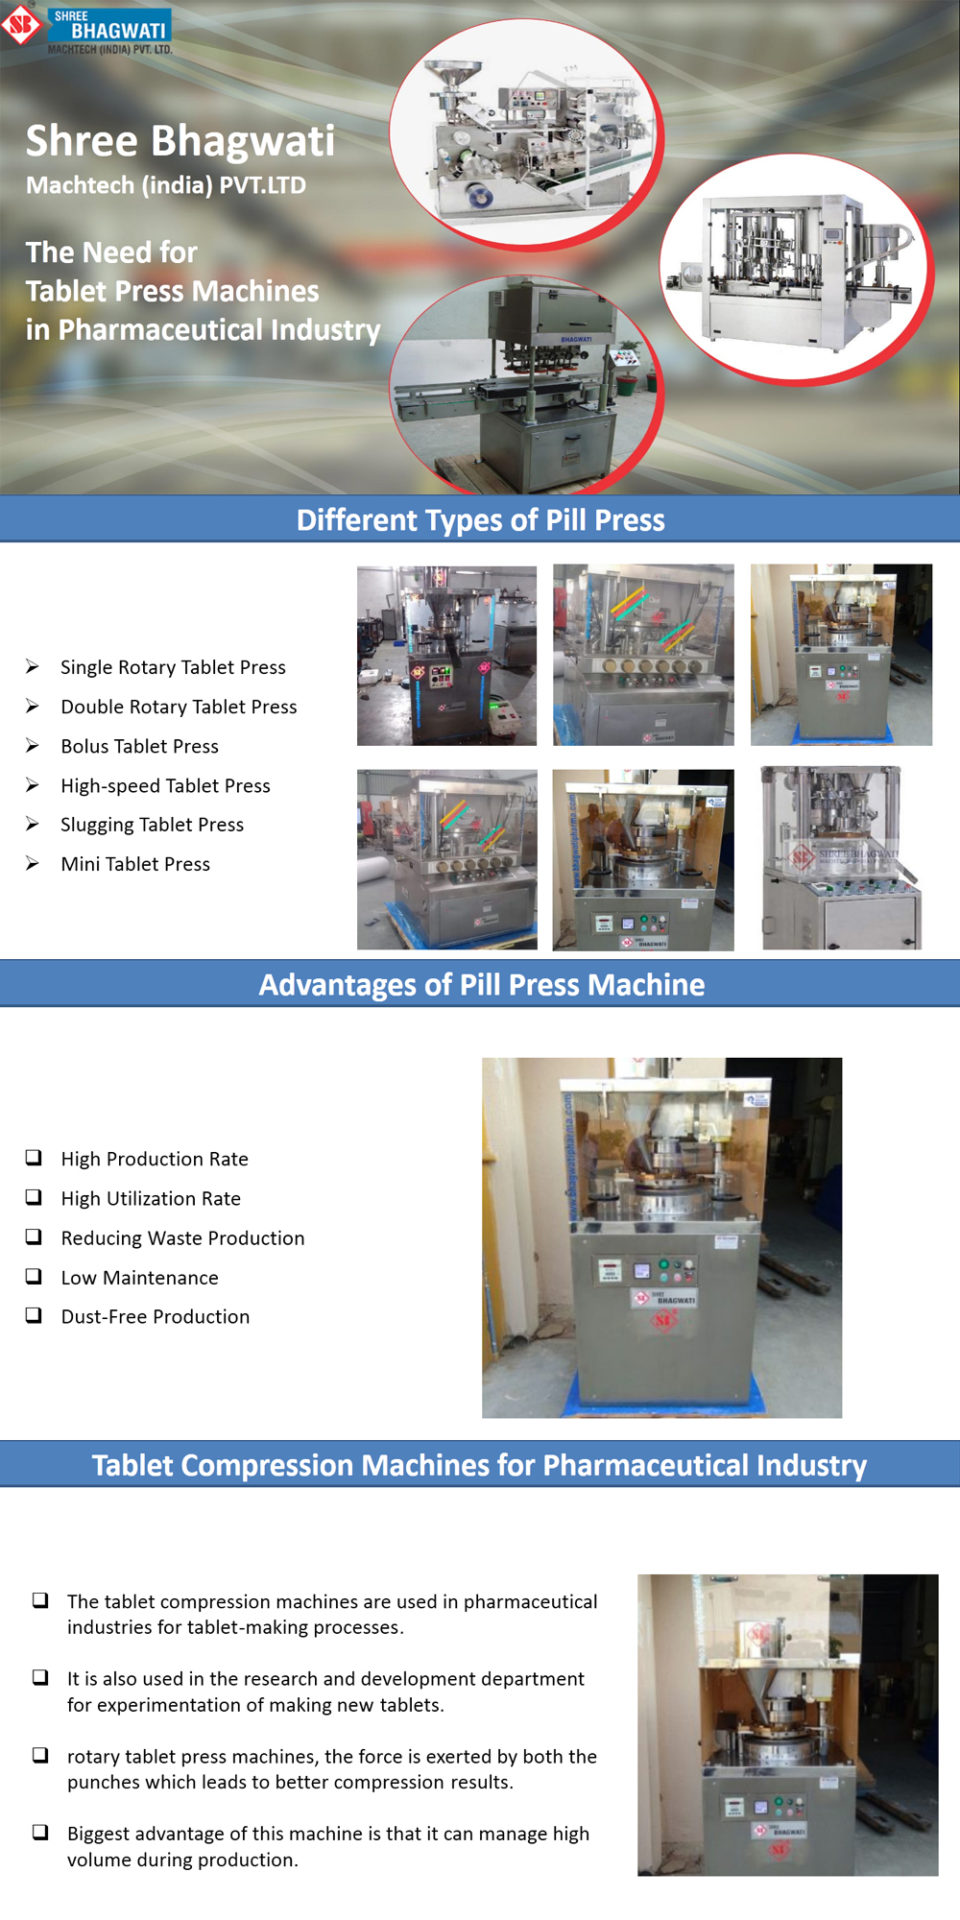 The Need for Tablet Press Machines in Pharmaceutical Industry